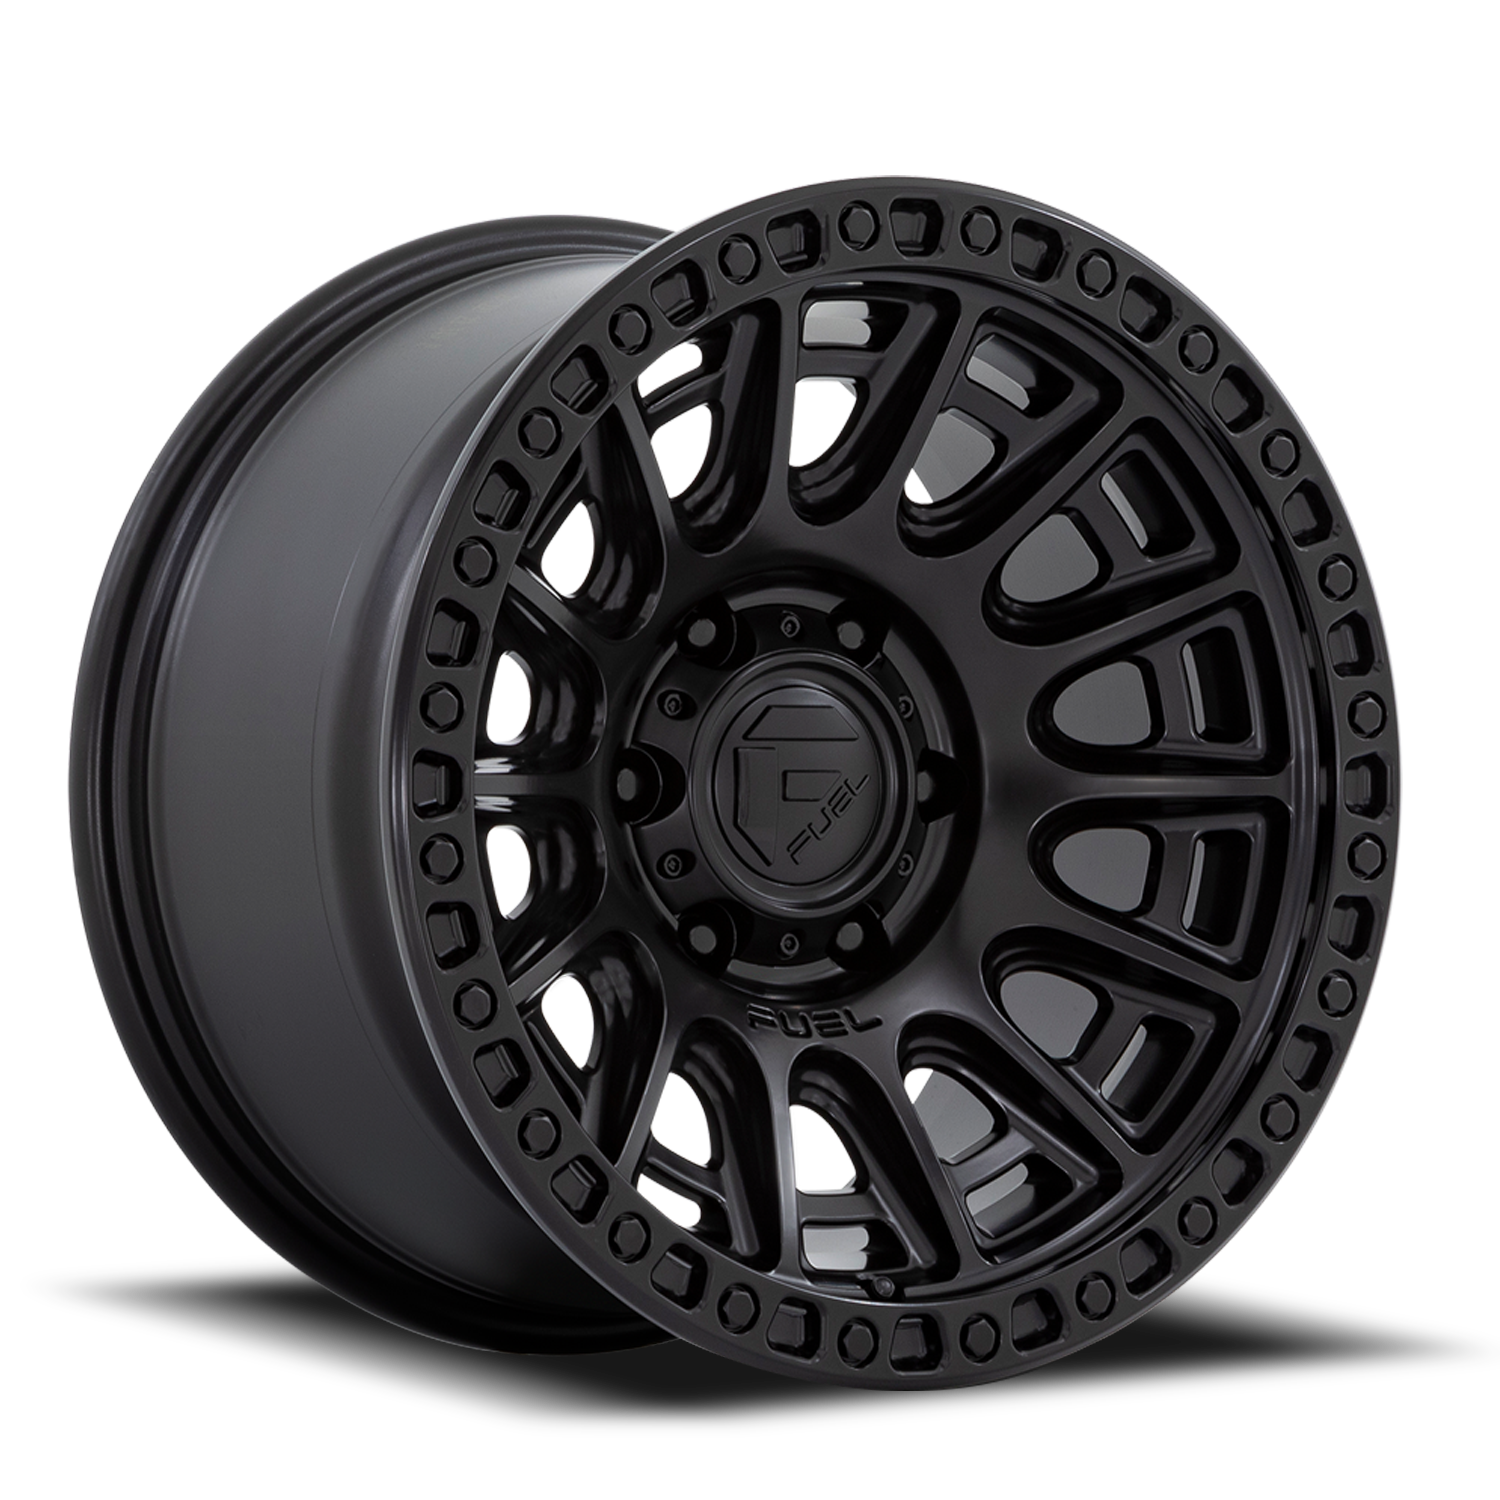 Aluminum Wheels 17X9 Cycle D832 6 On 139.7 Blackout 106.1 Bore 1 Offset 32.25 Lbs Fuel Off Road Wheels